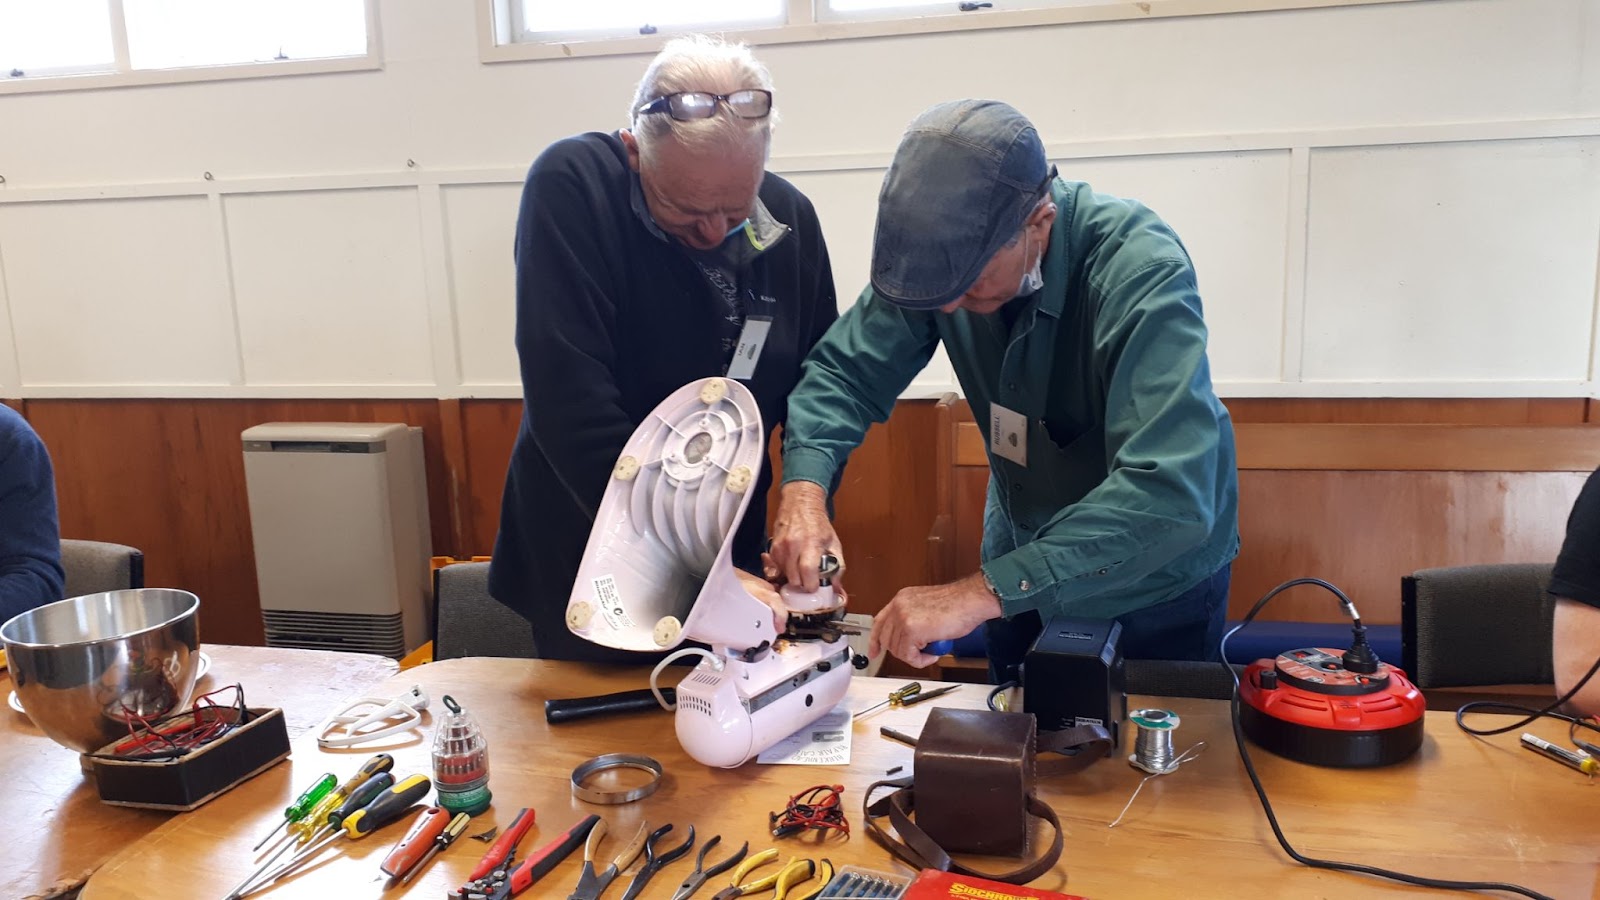 Two men are working at fixing a fan, on a table with many small tools